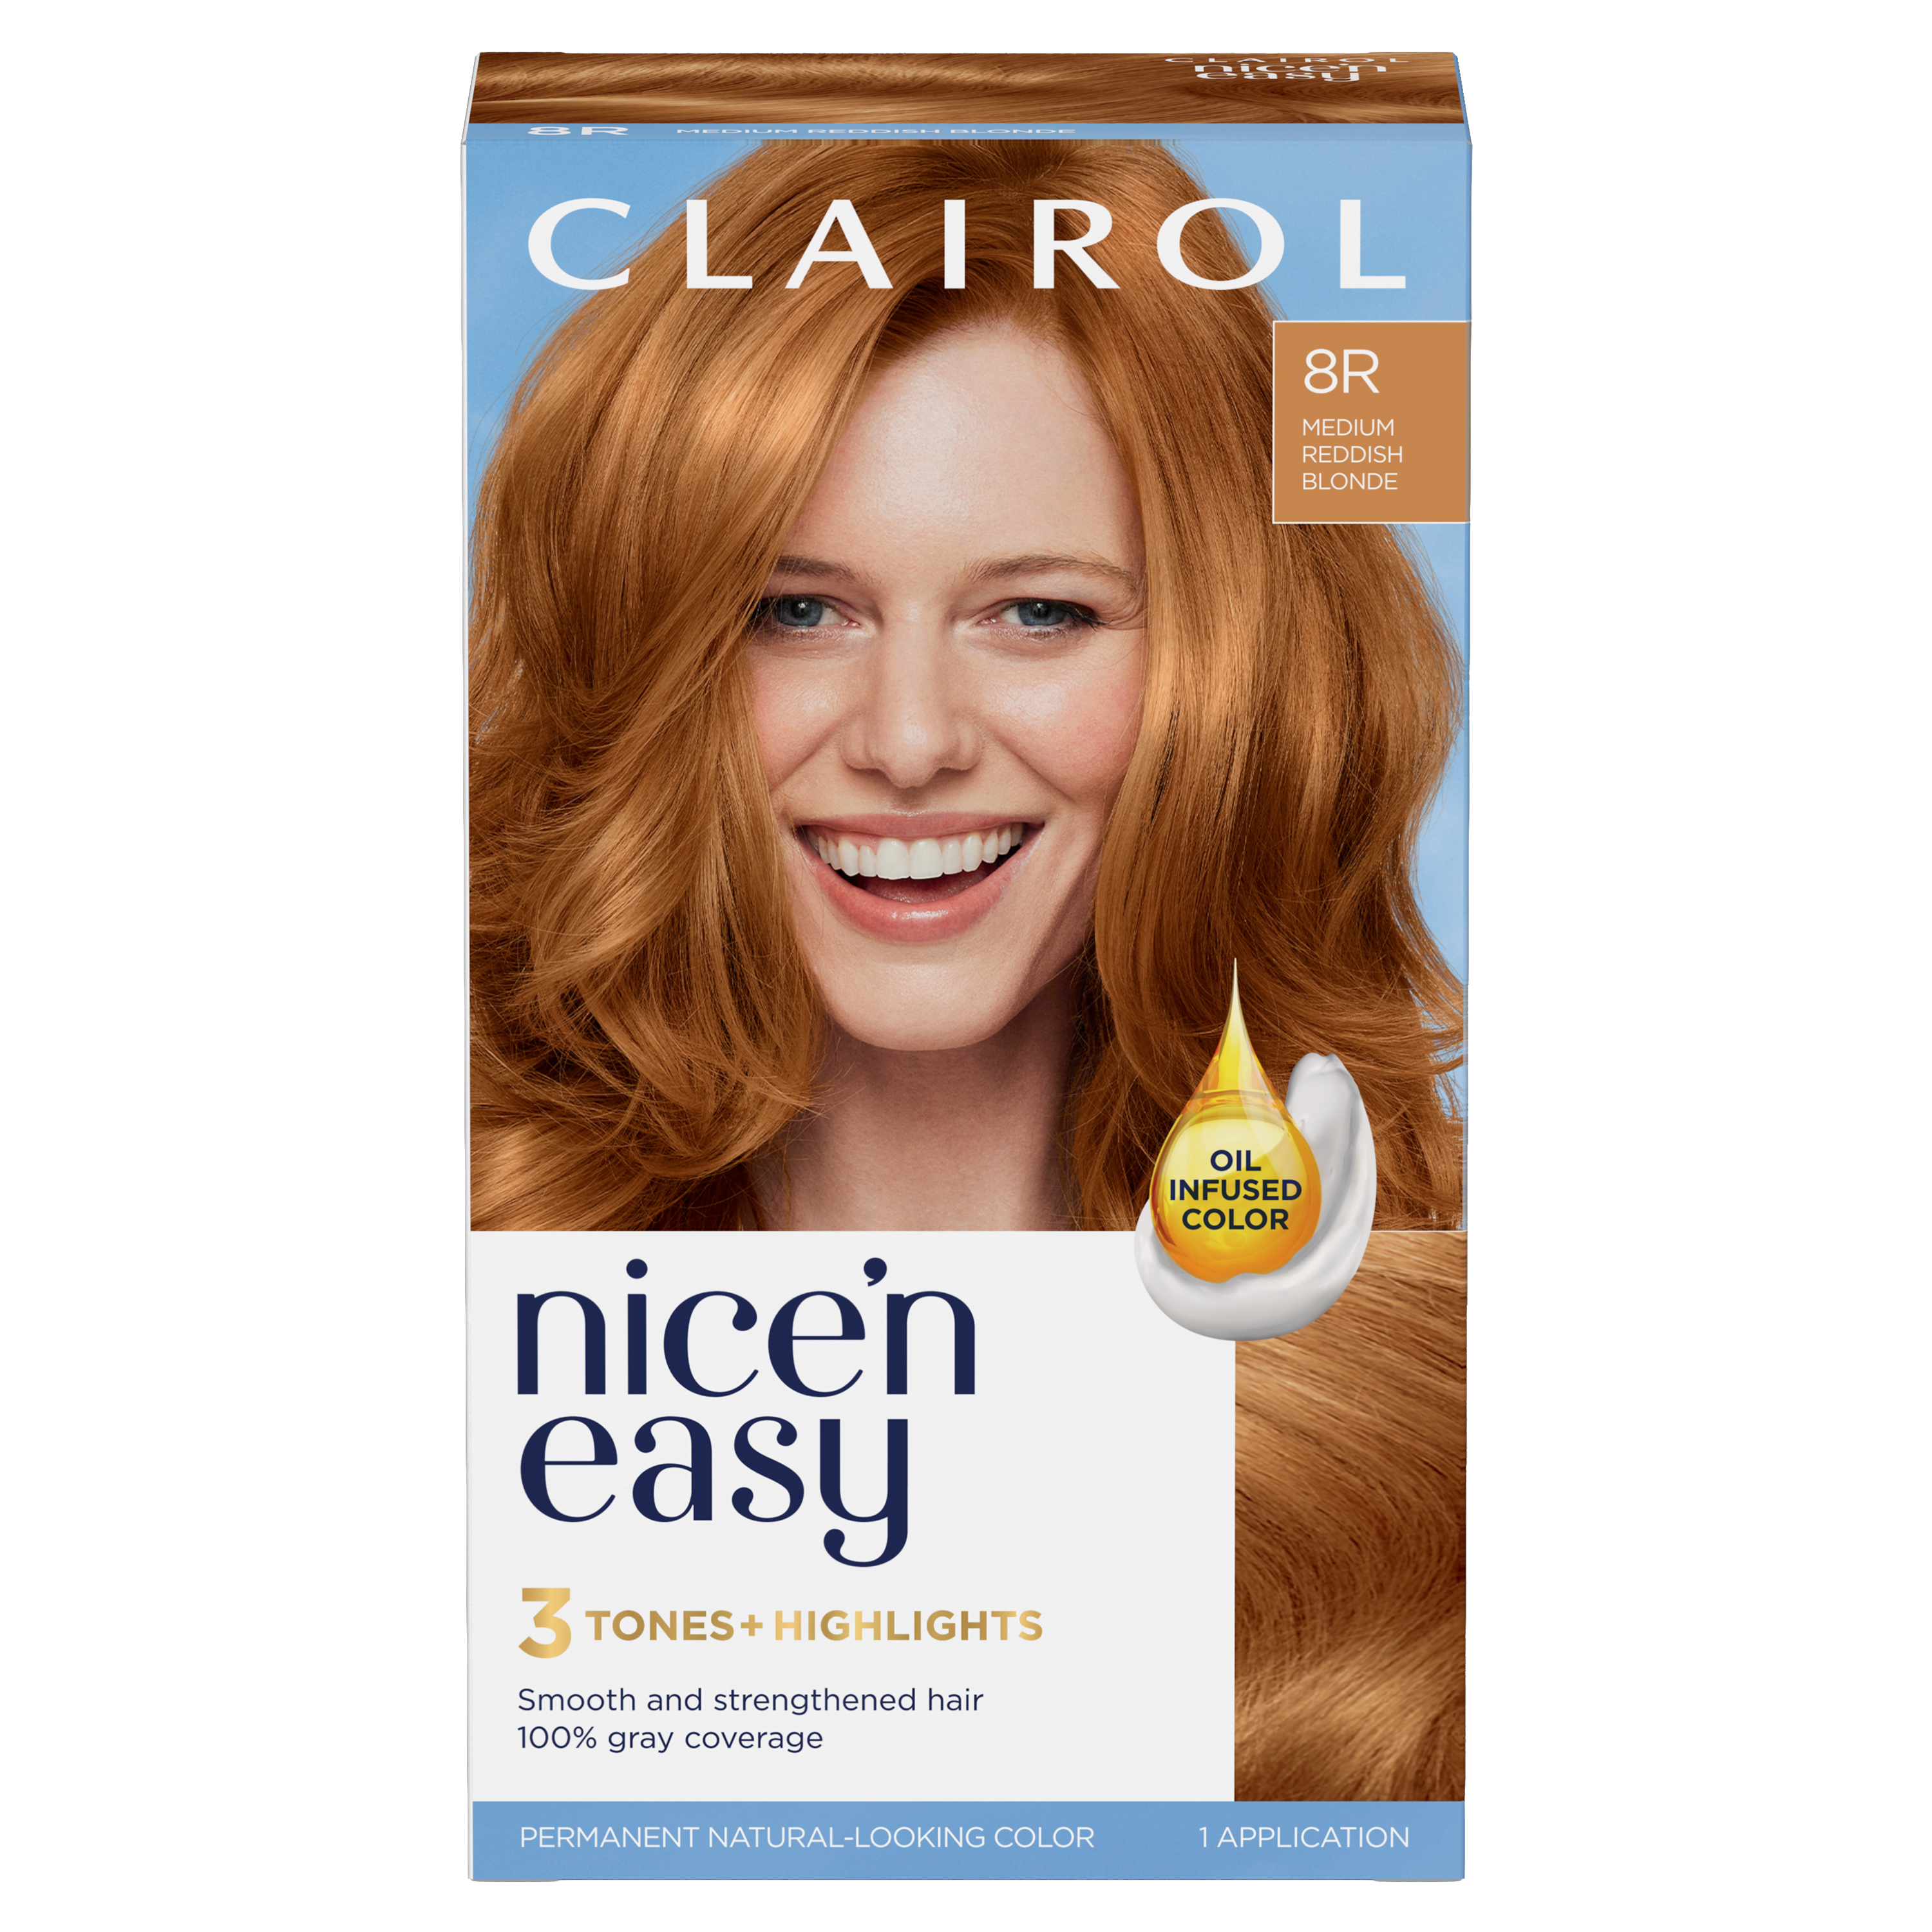 Clairol Products  Clairol Distributor S4P Medium Cool blonde 7A